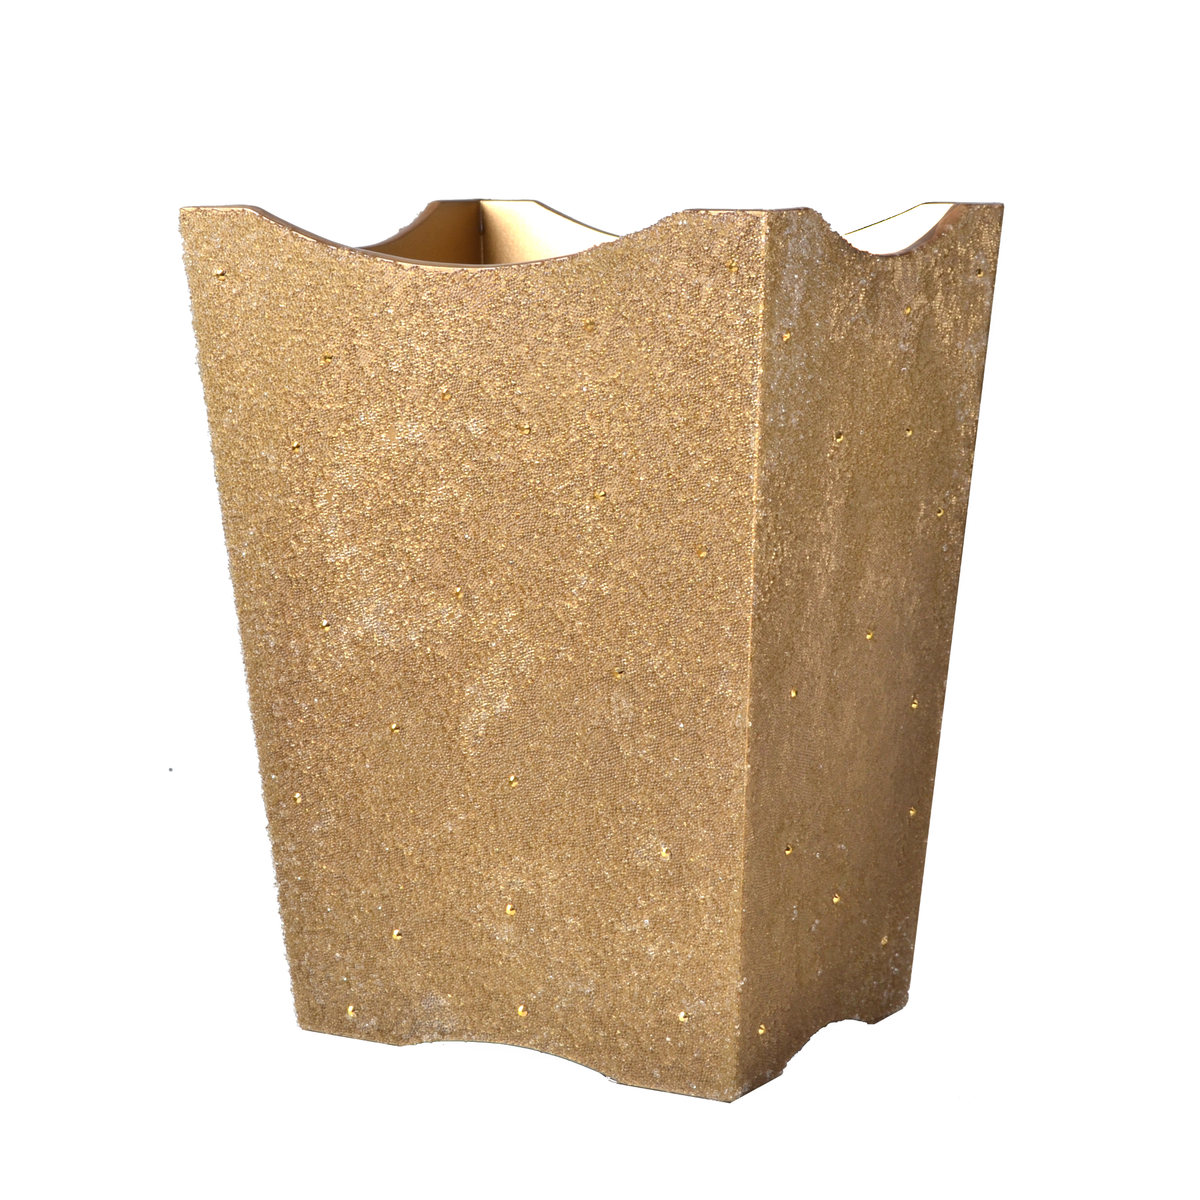 Wastebasket of Mike and Ally Valletta Bath Accessories in Gold Color